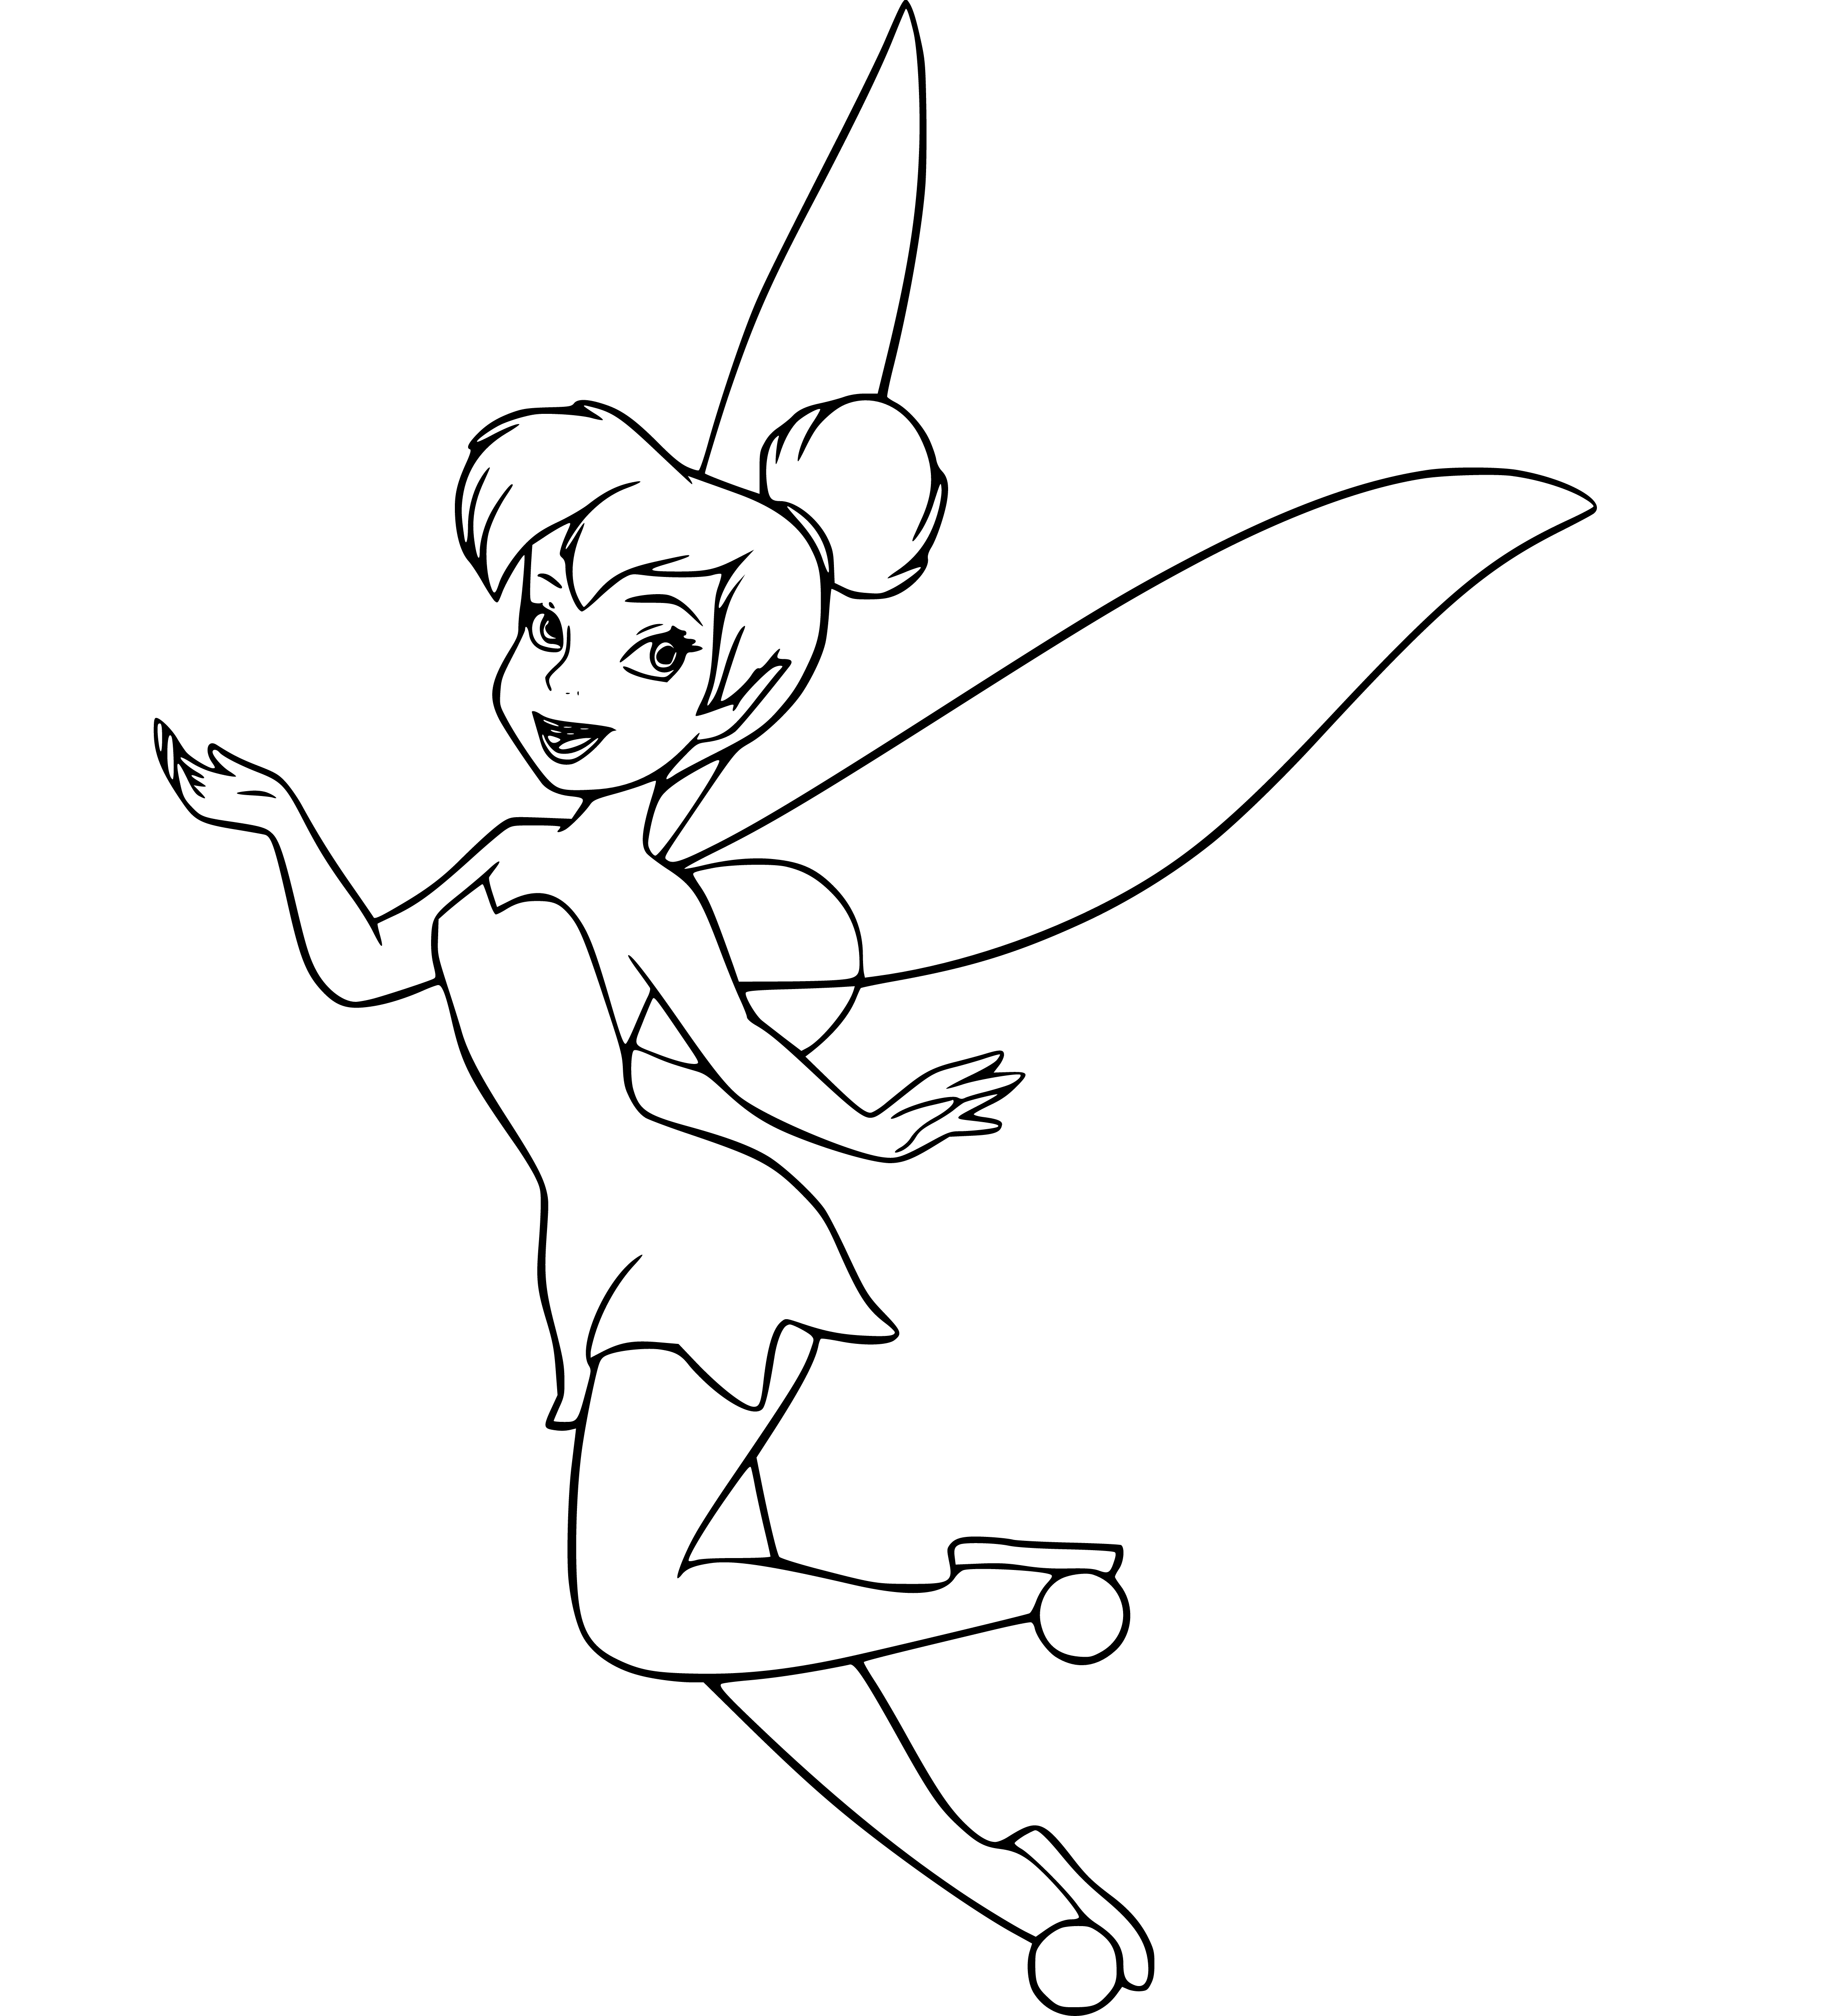 Cute Tinker Bell Coloring Page Fairy - SheetalColor.com